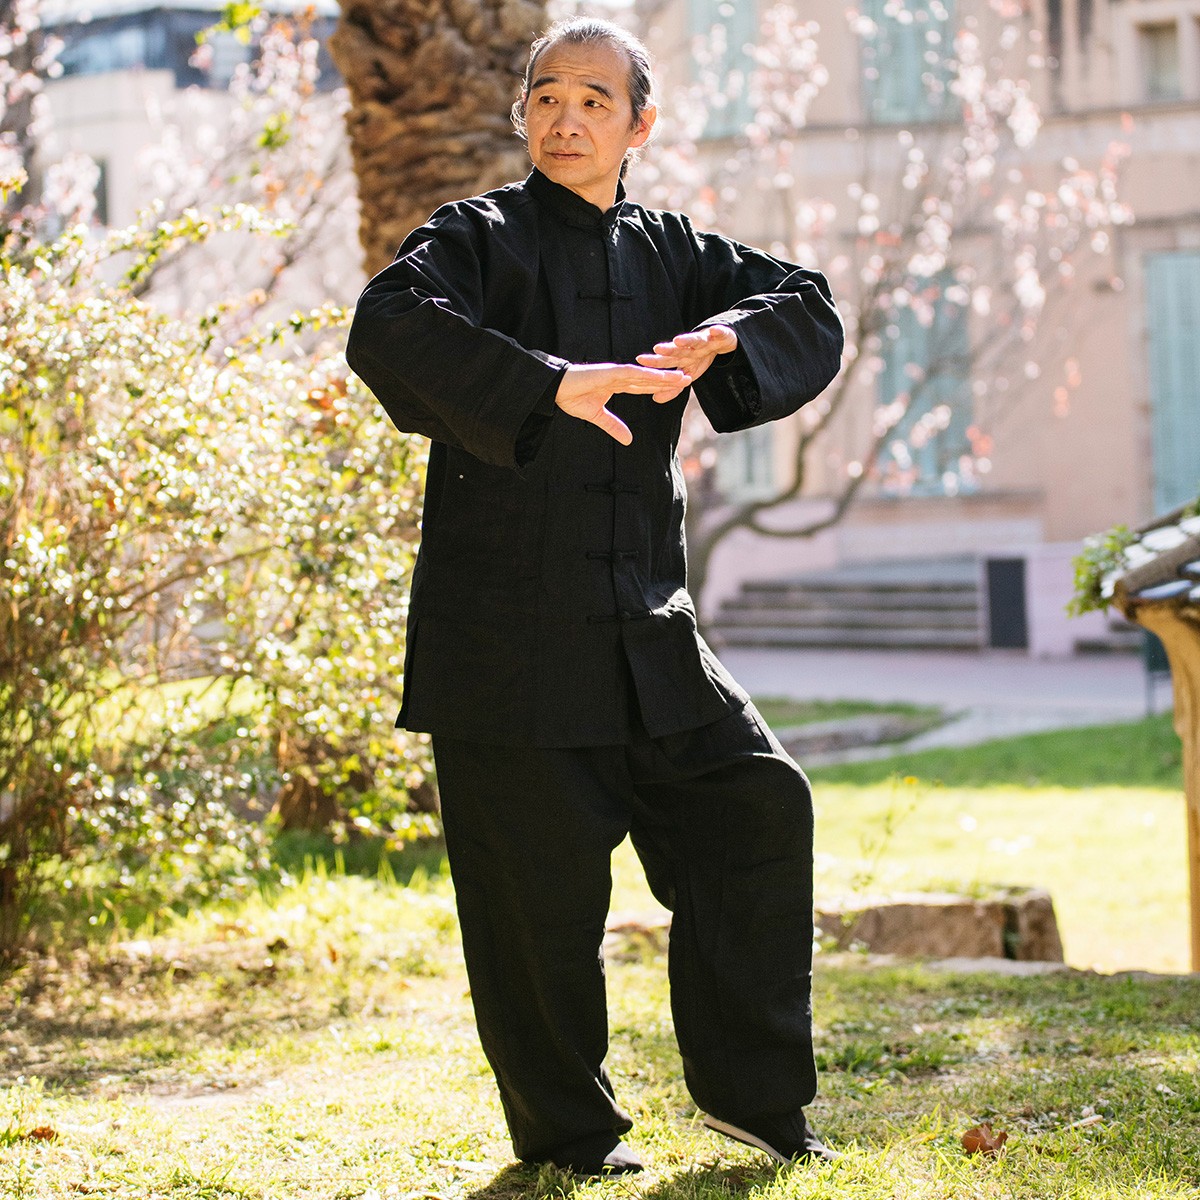 100% Cotton Black Kung Fu Martial Arts Tai Chi Pant Trousers XS-XL or  Tailor Custom Made - Chinese Fashion Style . com